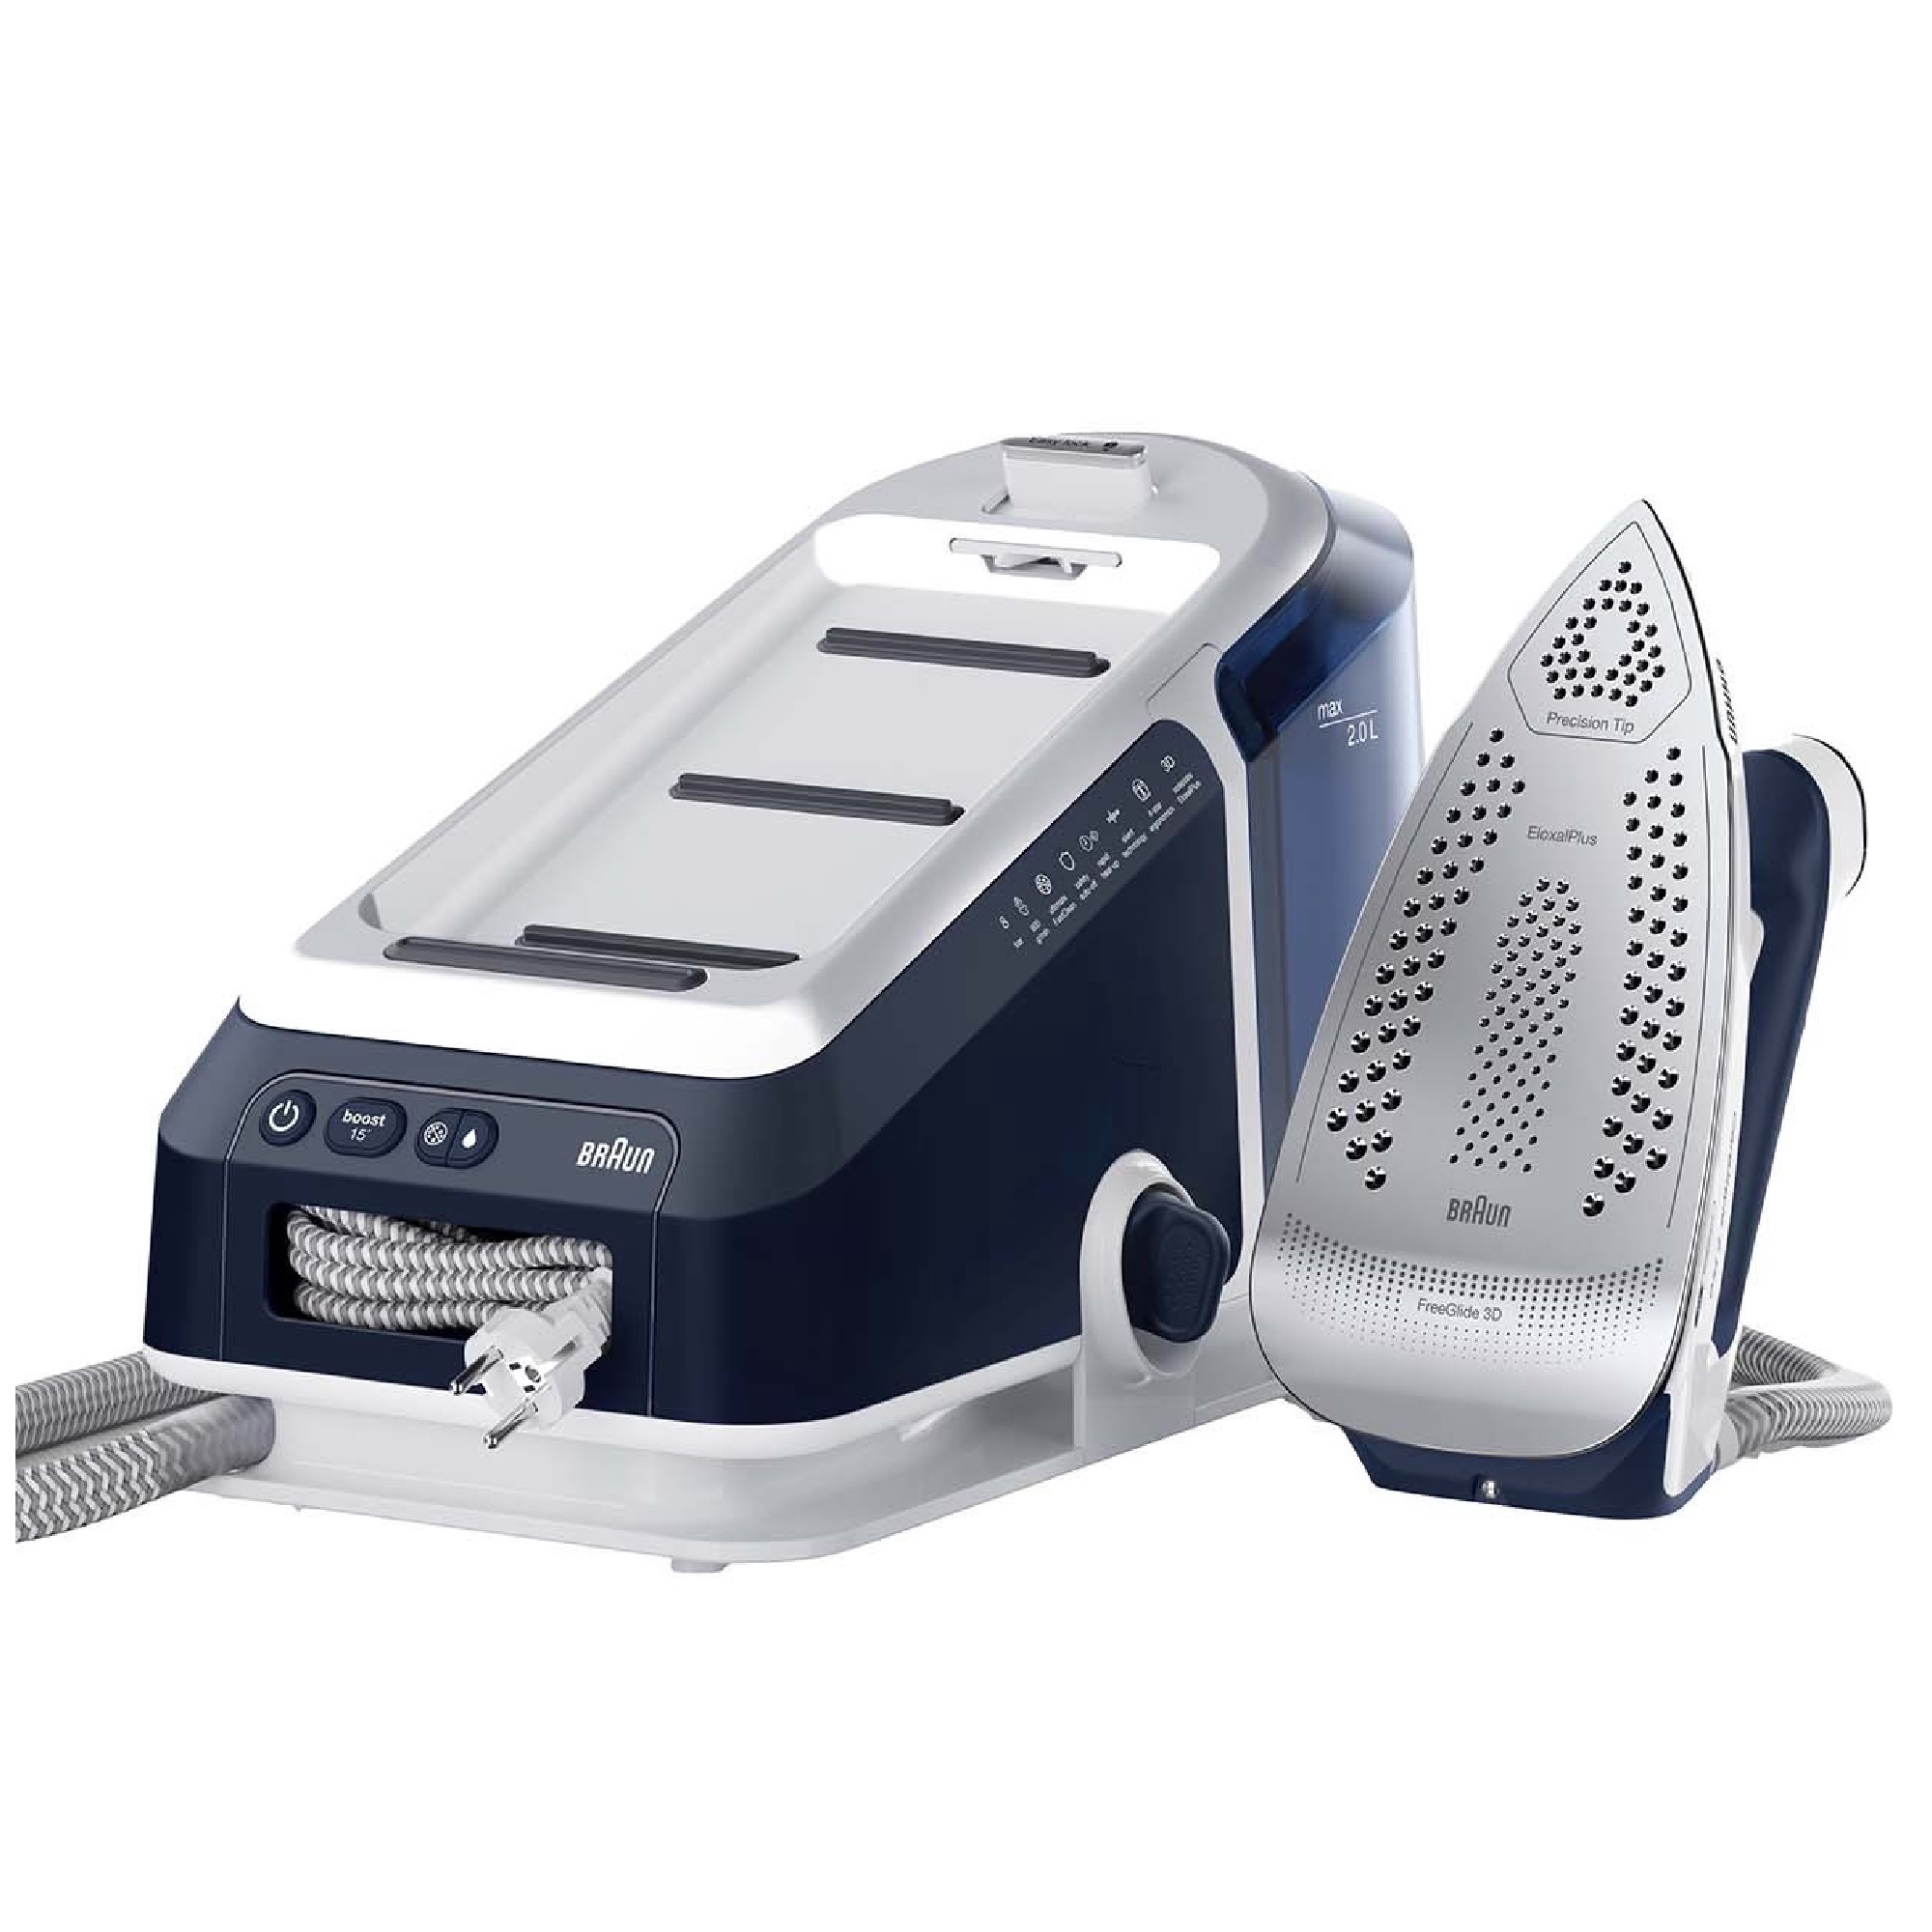 Steam generator irons review фото 22